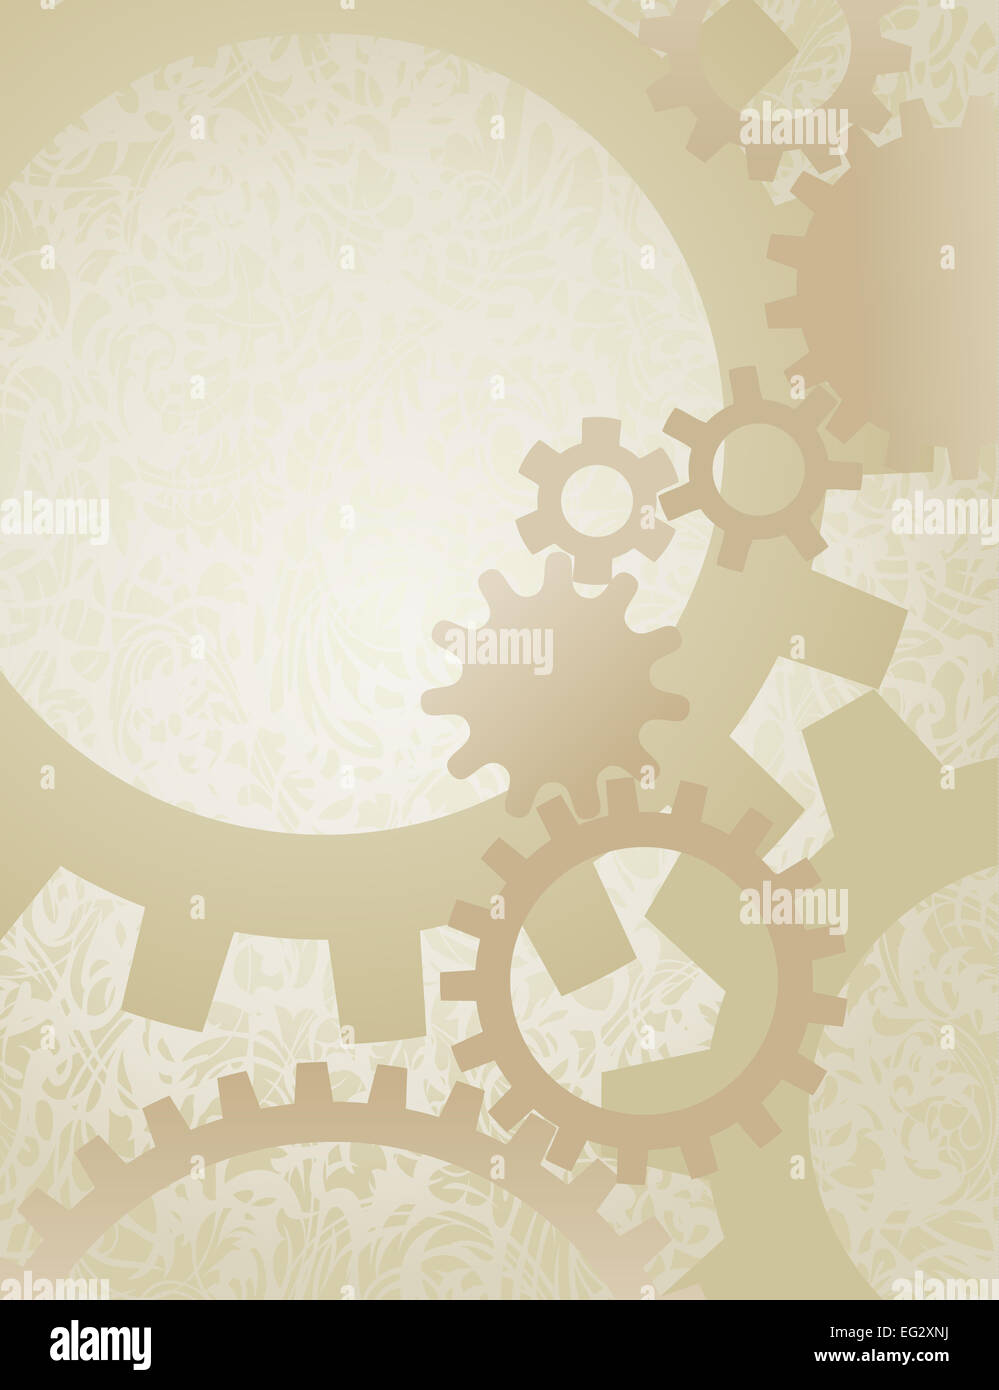 Steampunk Gears Background on Parchment Stock Photo